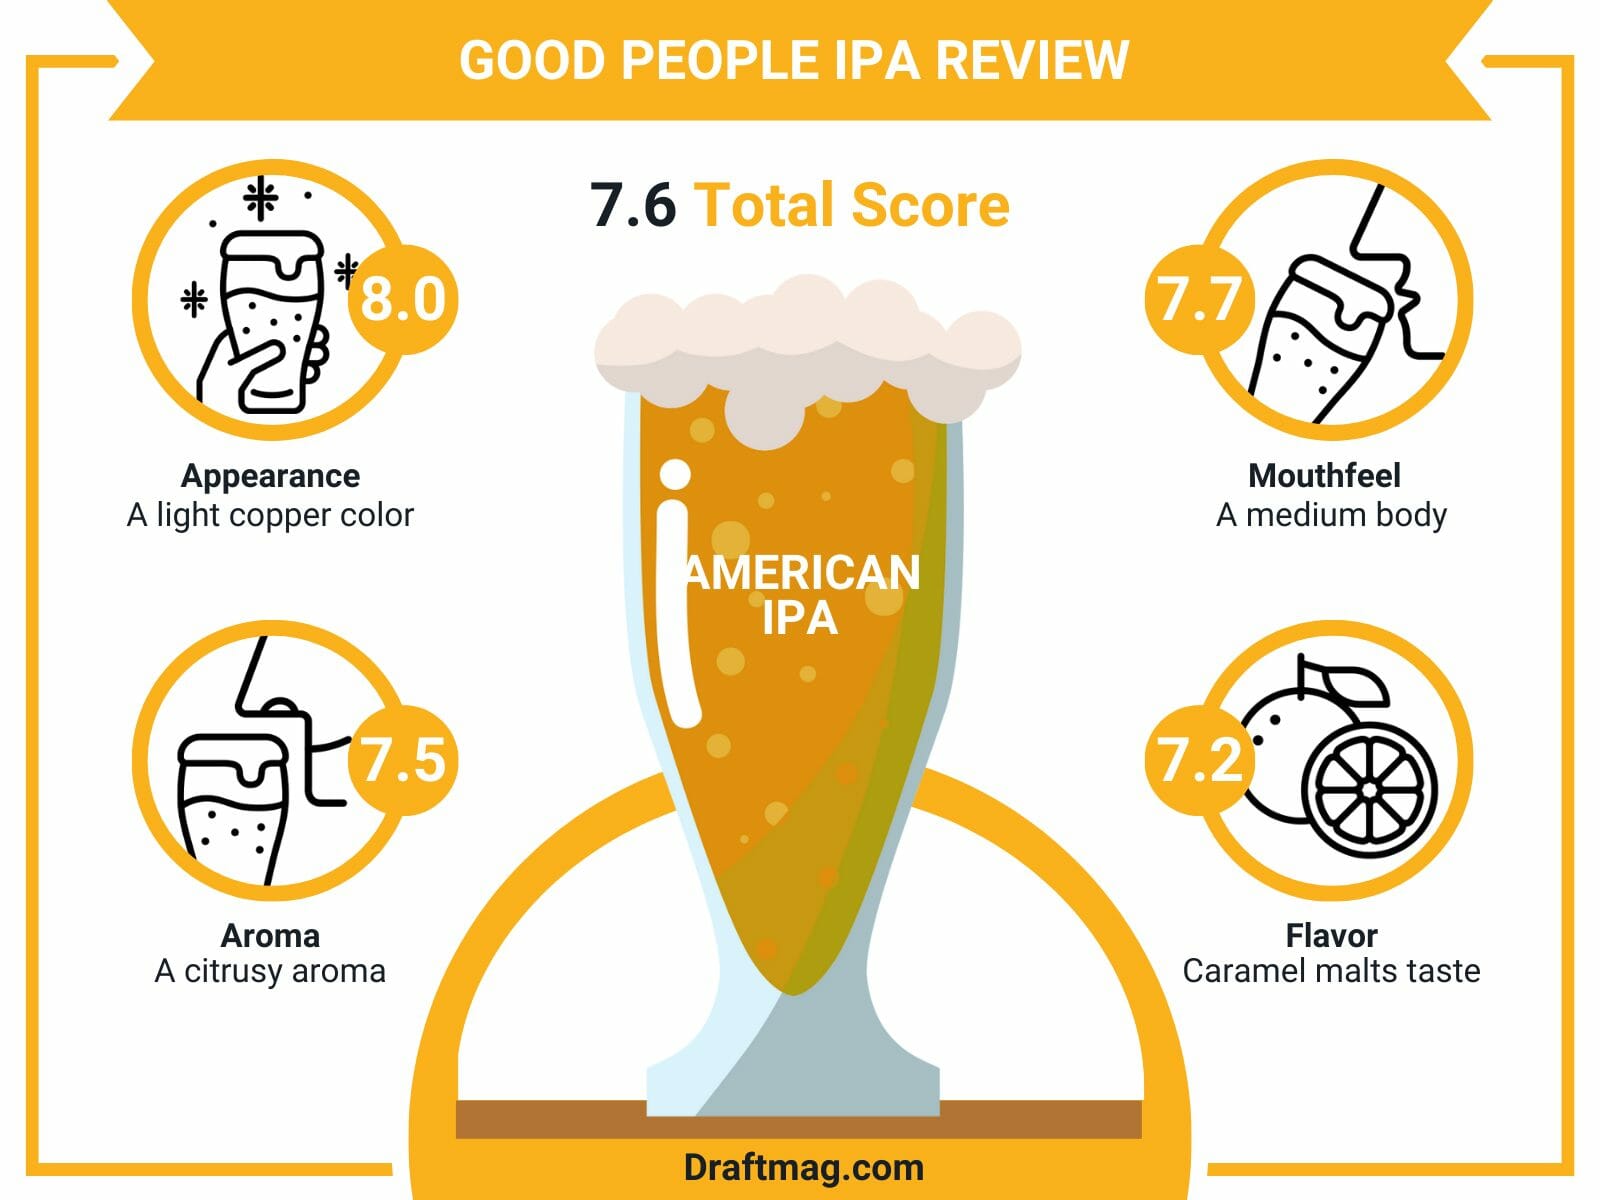 Good people ipa review infographic